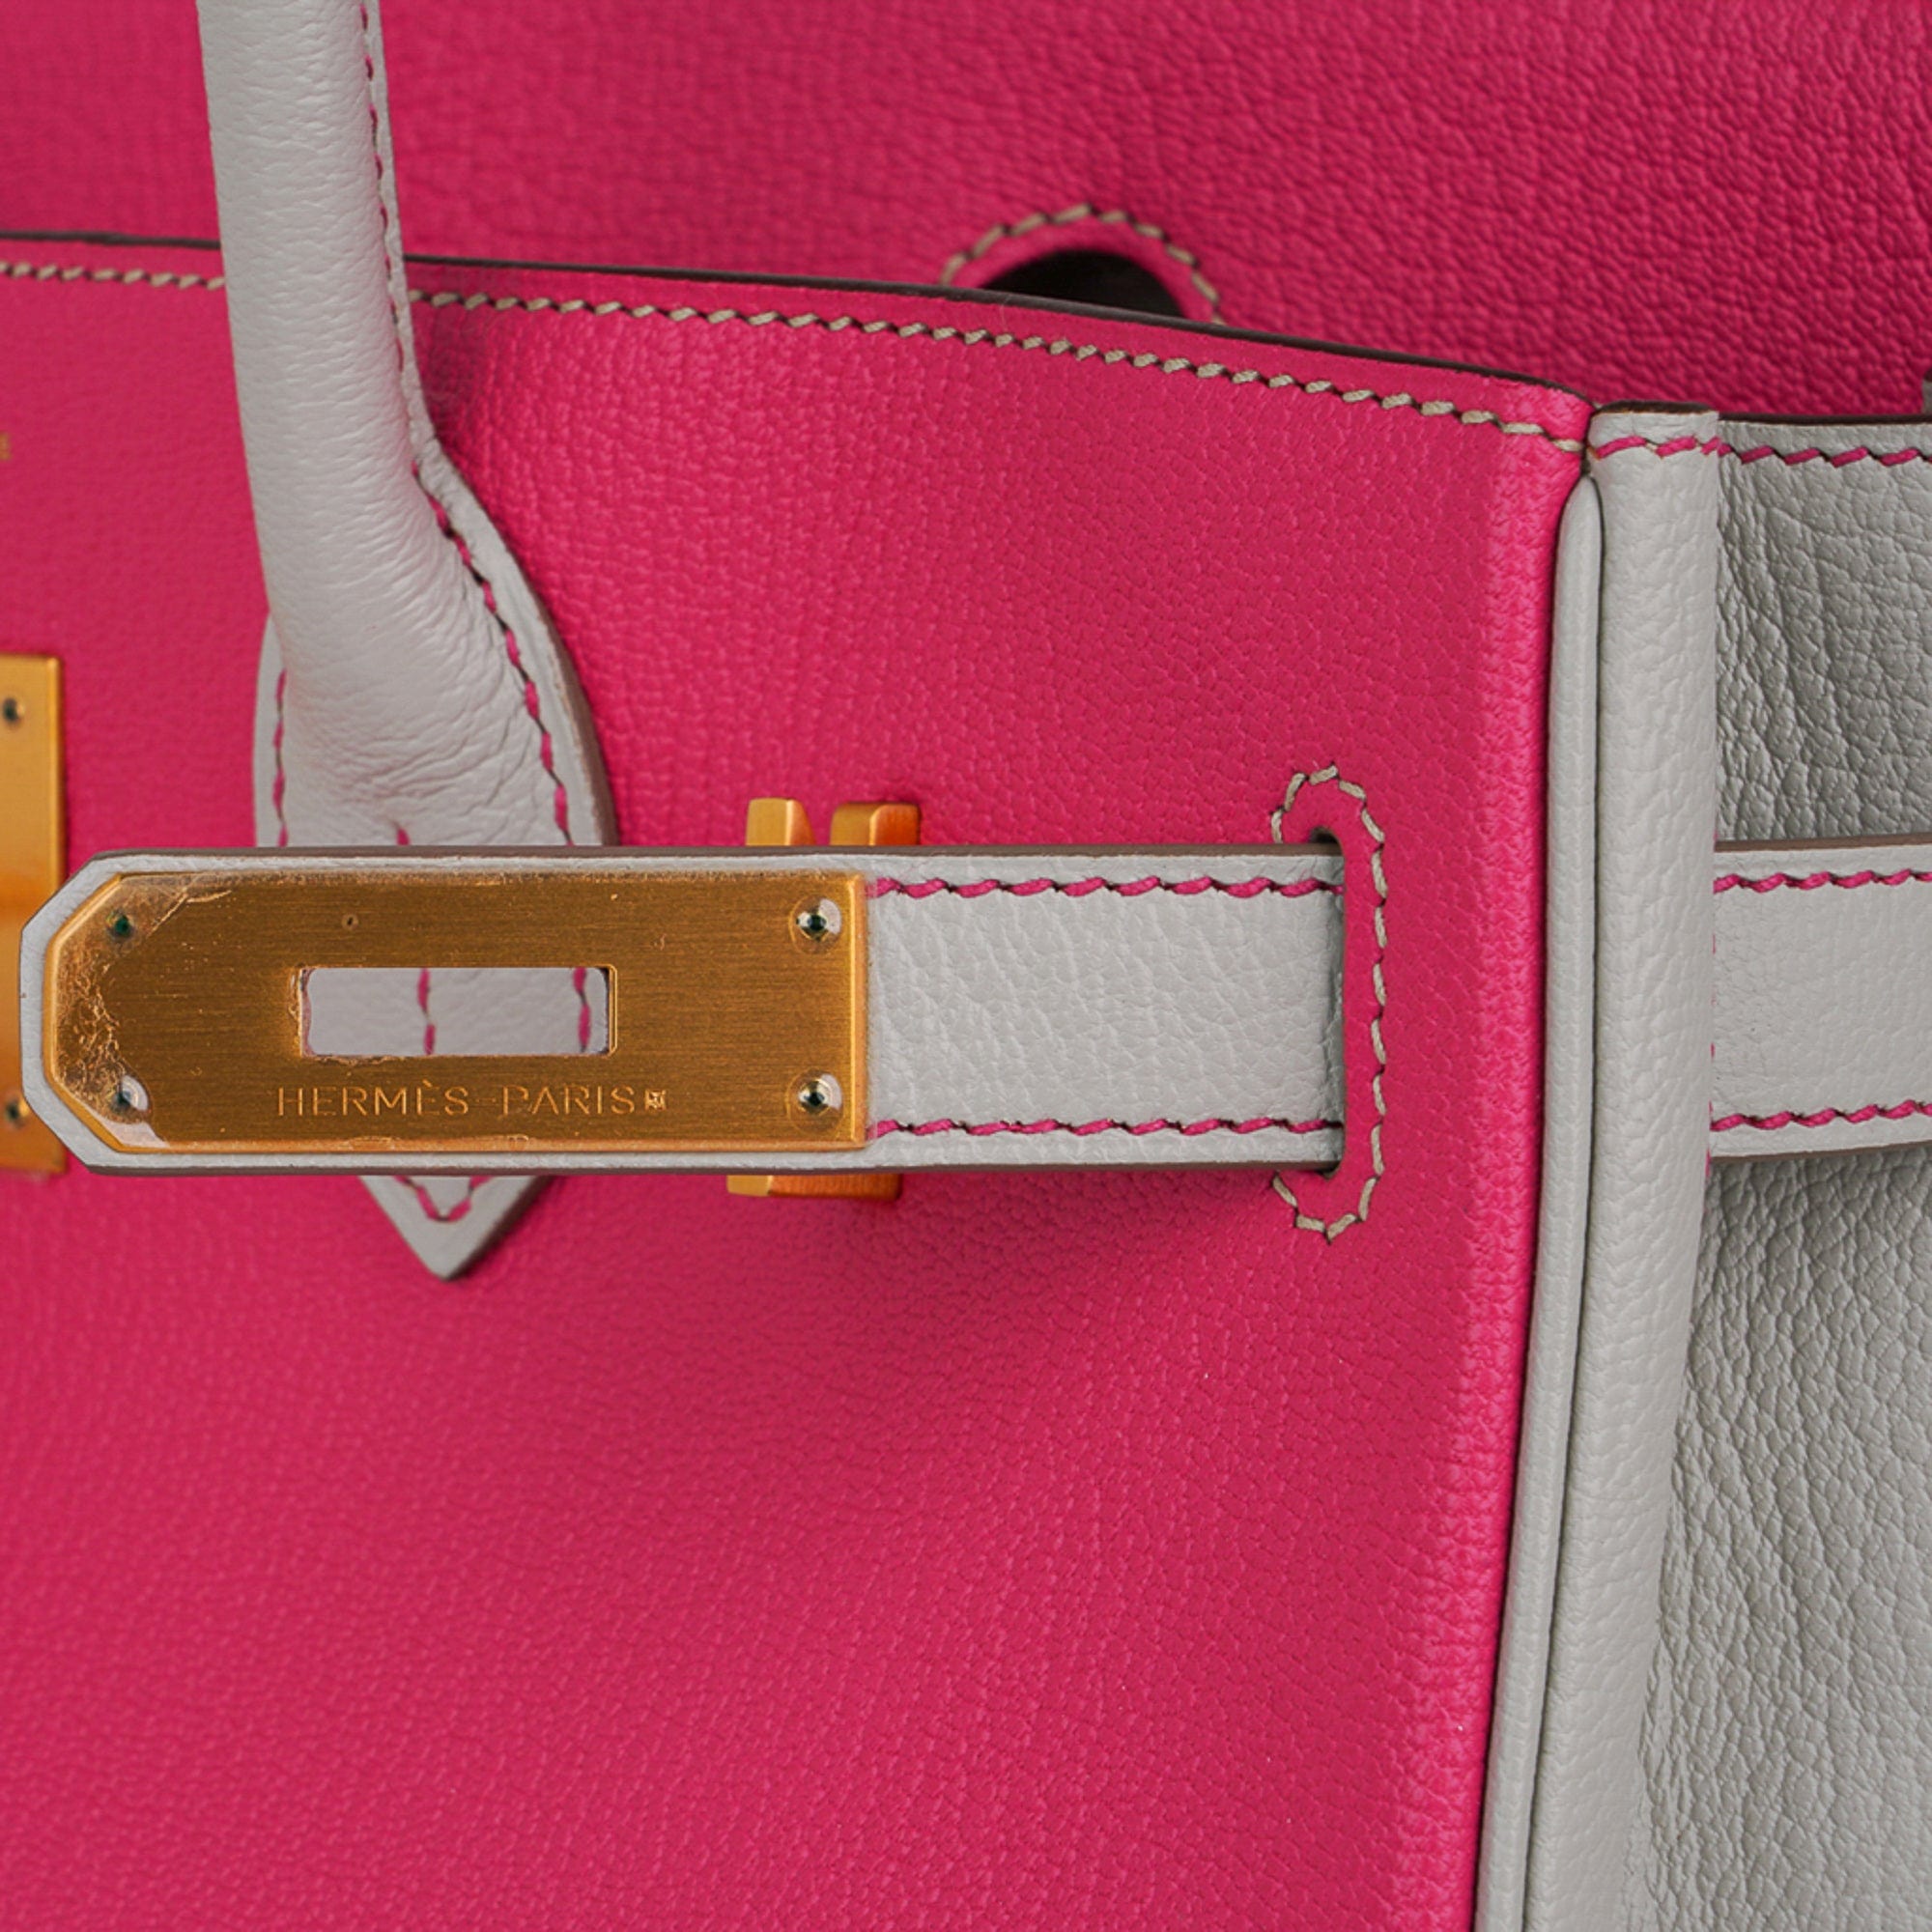 Hermes Special Order HSS Birkin 30 Bag in Rose Shocking and Gris Perle Chevre Leather with Gold Hardware